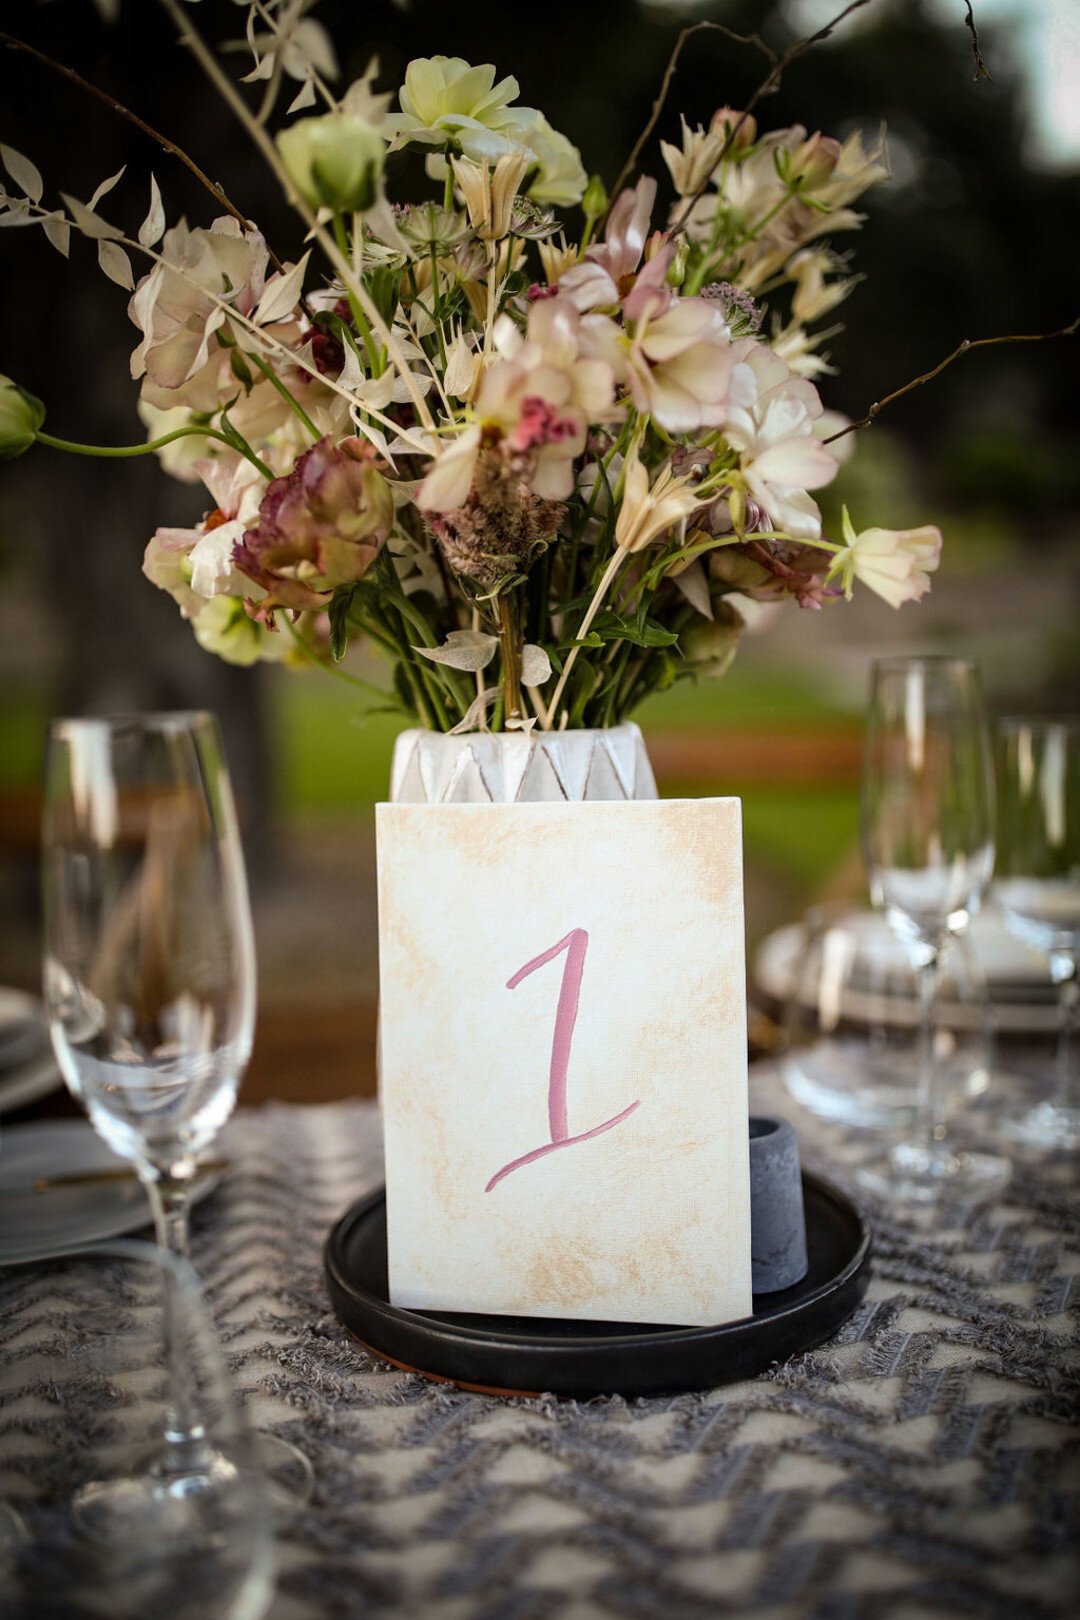 www.santabarbarawedding.com | Kimberly Conley Photography | Loriana | Hive Events | Dulceblomma | La Tavola | The Tent Merchant | Brown and Co Designs | wedding table numbers